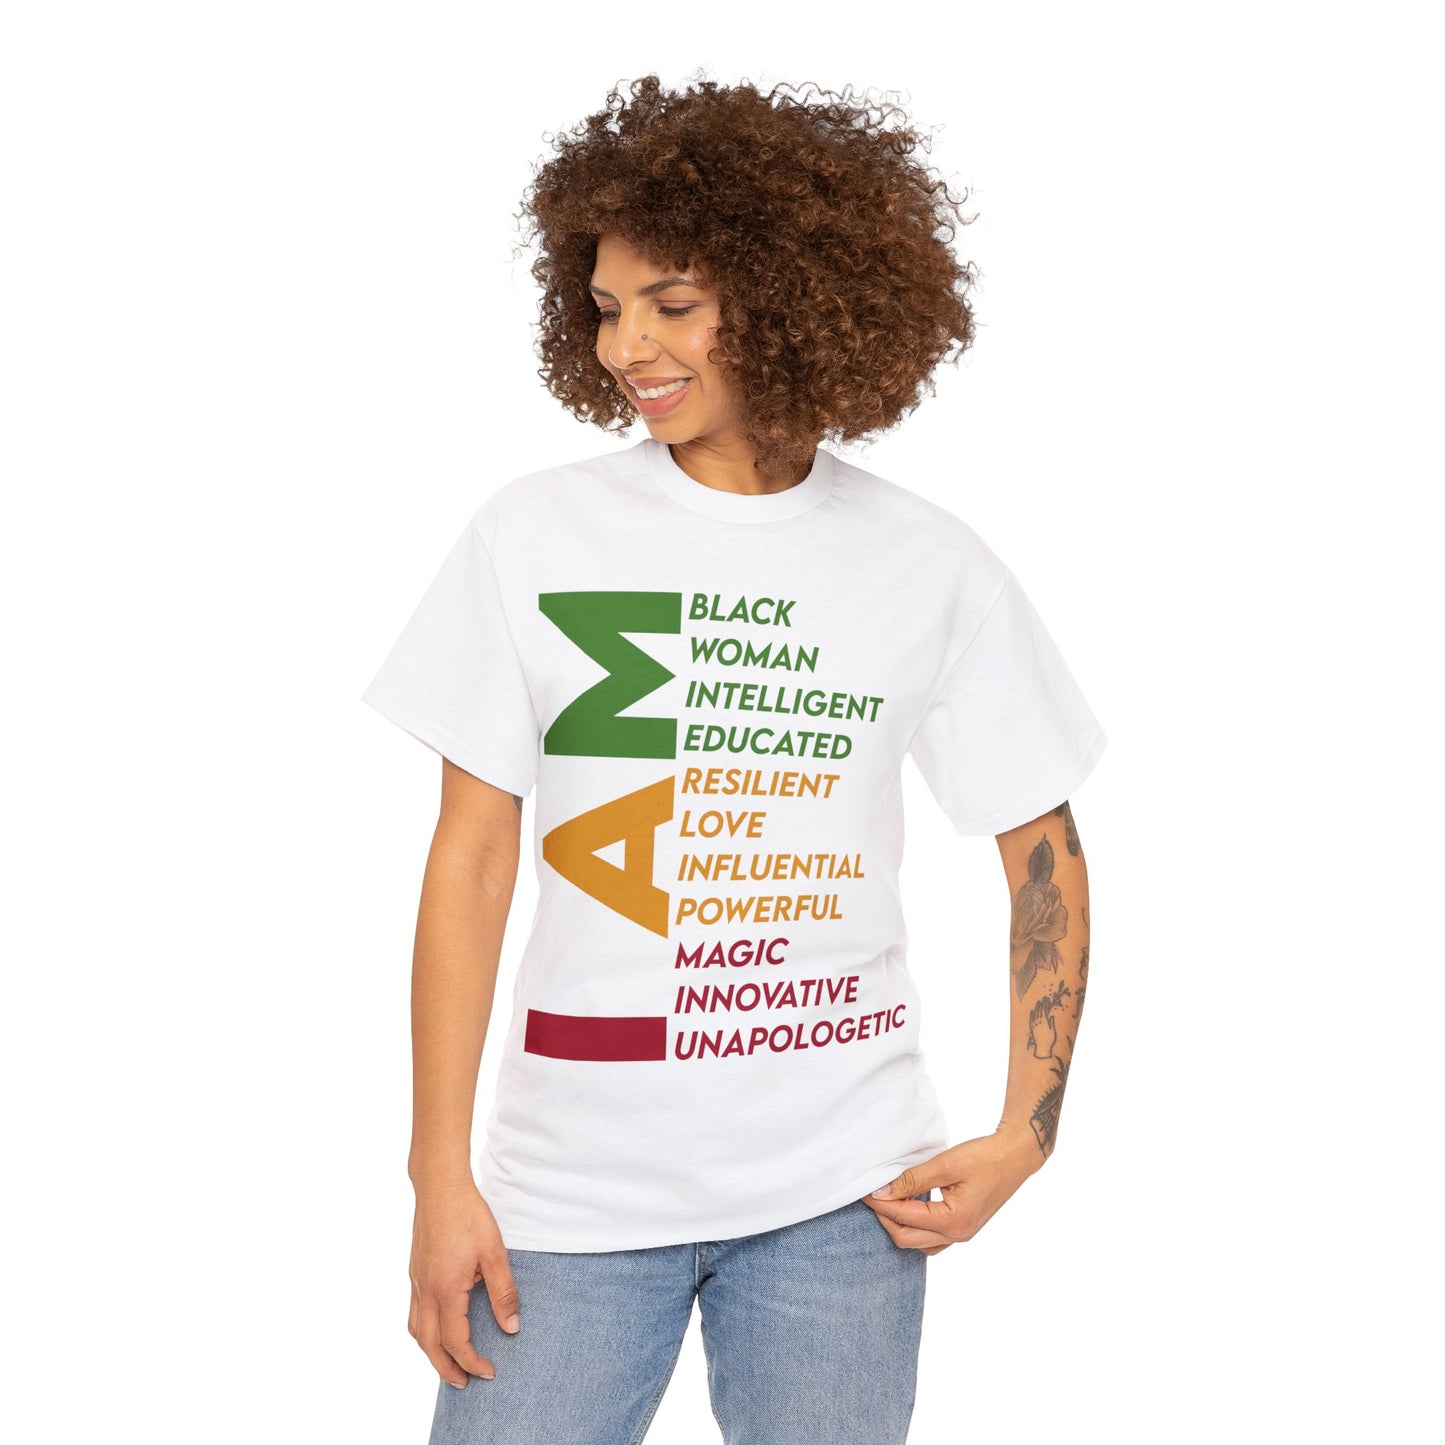 White Unisex Heavy Cotton Tee saying "I AM: Black Woman, Intelligent, Educated, Resilient, Love, Influential, Powerful, Magic, Innovative, and Unapologetic."